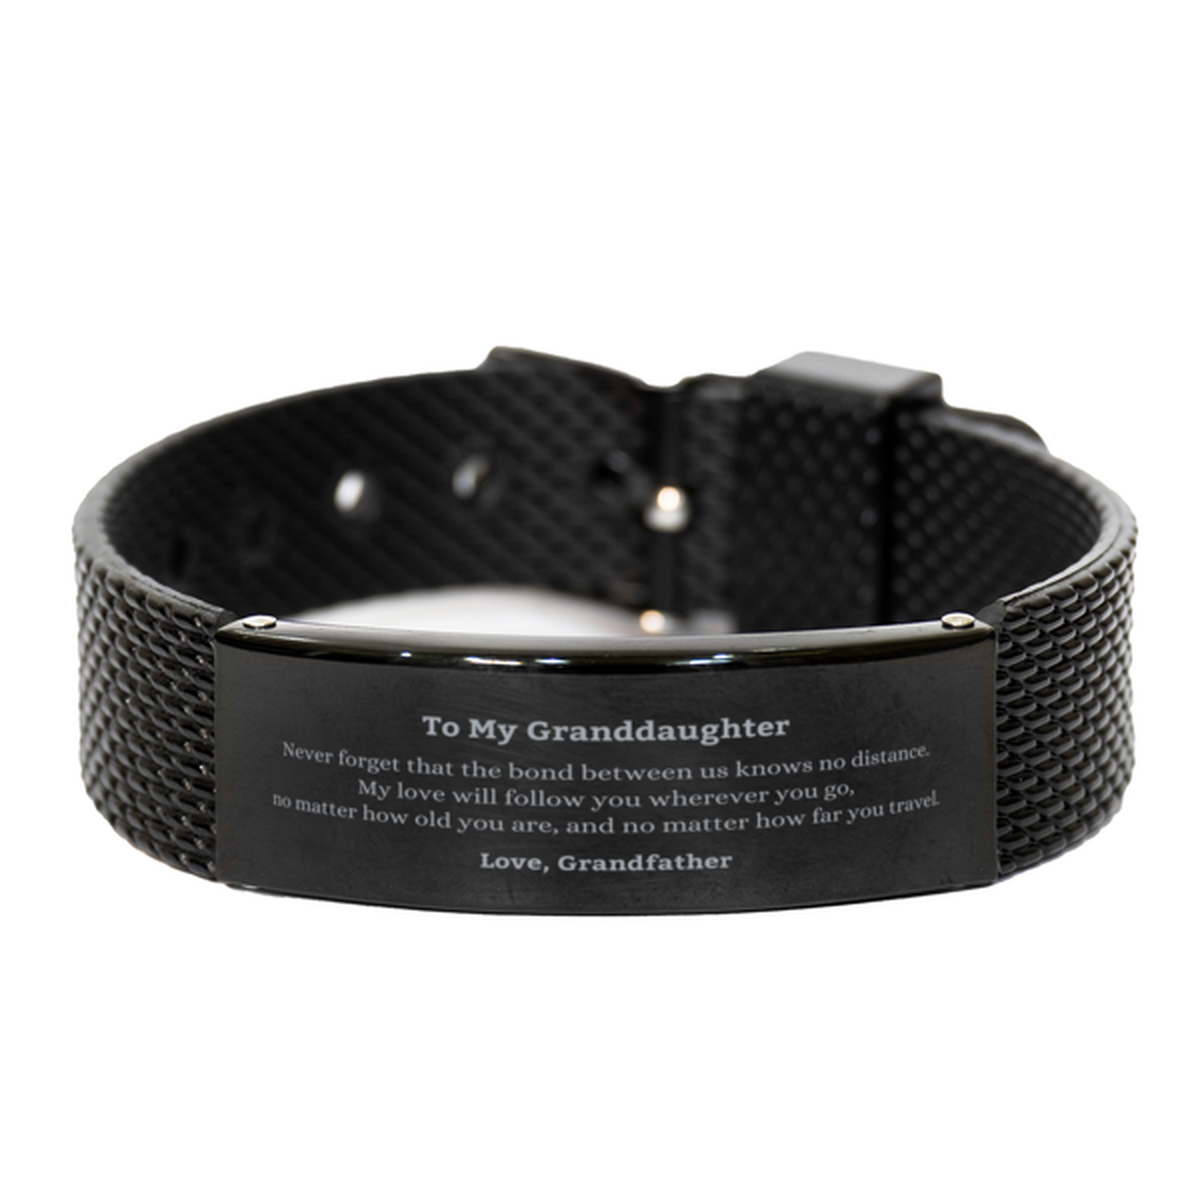 Granddaughter Birthday Gifts from Grandfather, Adjustable Black Shark Mesh Bracelet for Granddaughter Christmas Graduation Unique Gifts Granddaughter Never forget that the bond between us knows no distance. Love, Grandfather